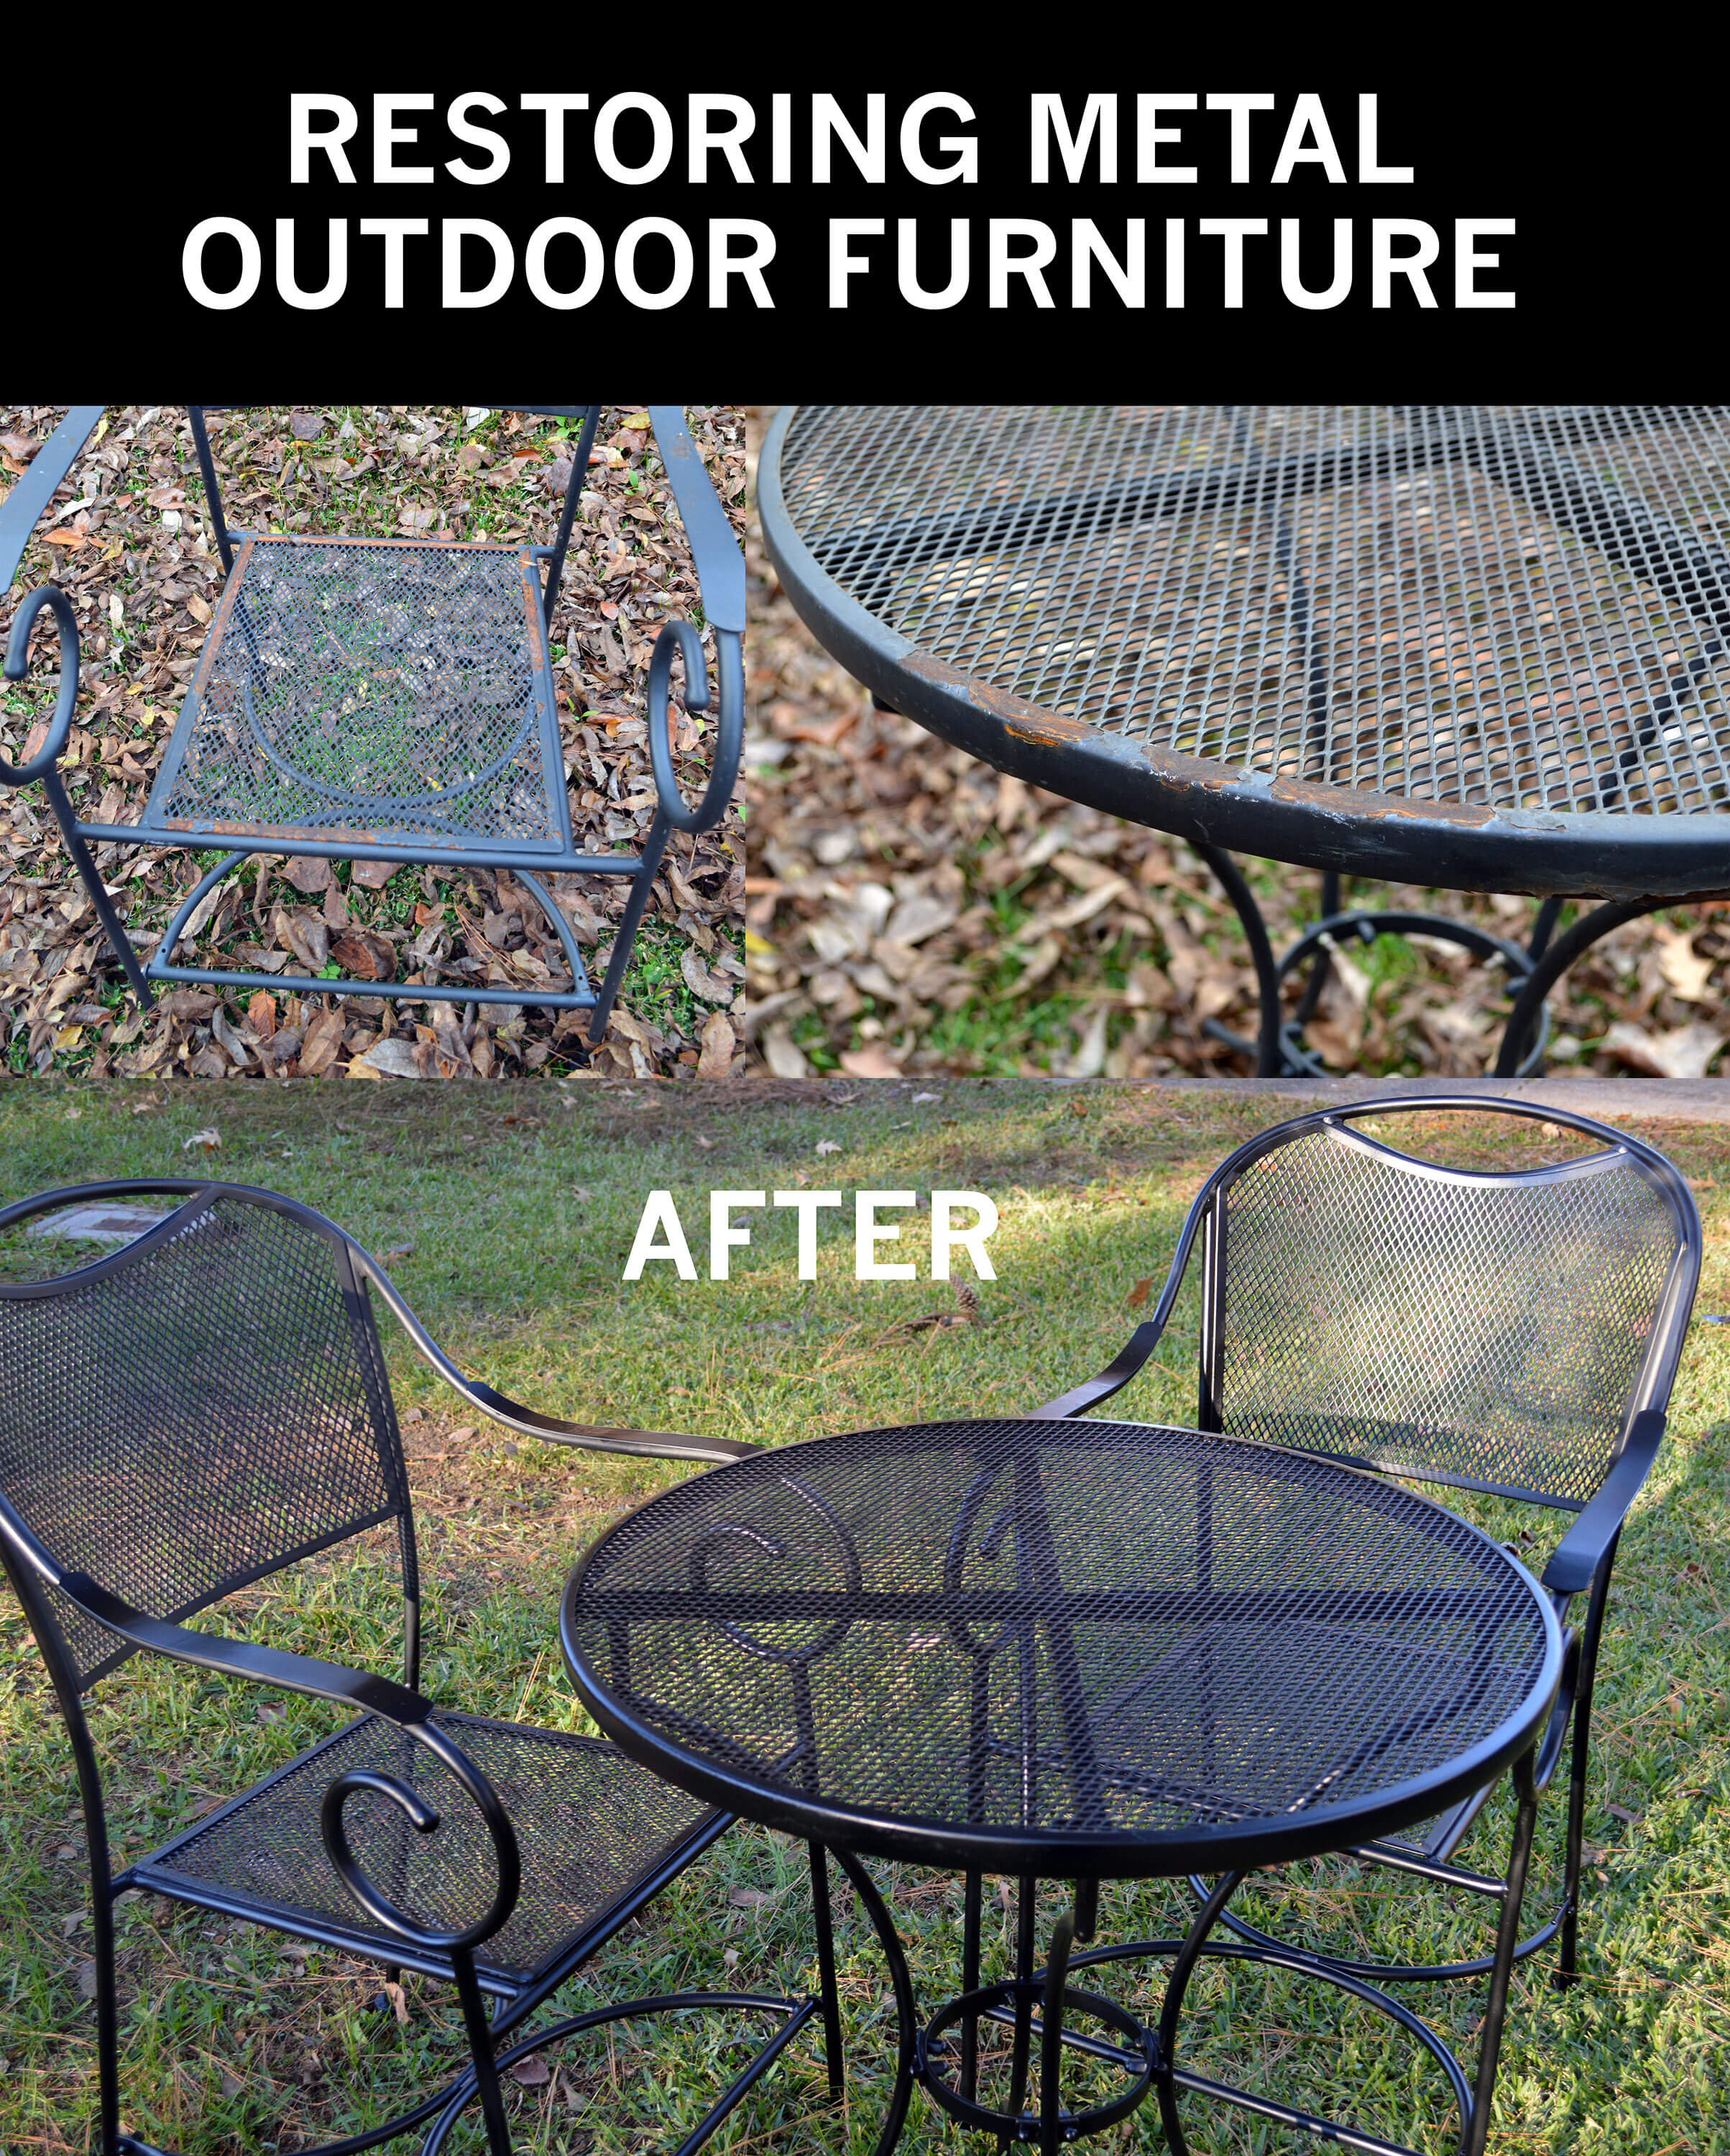 Restore metal outdoor furniture to "like new"